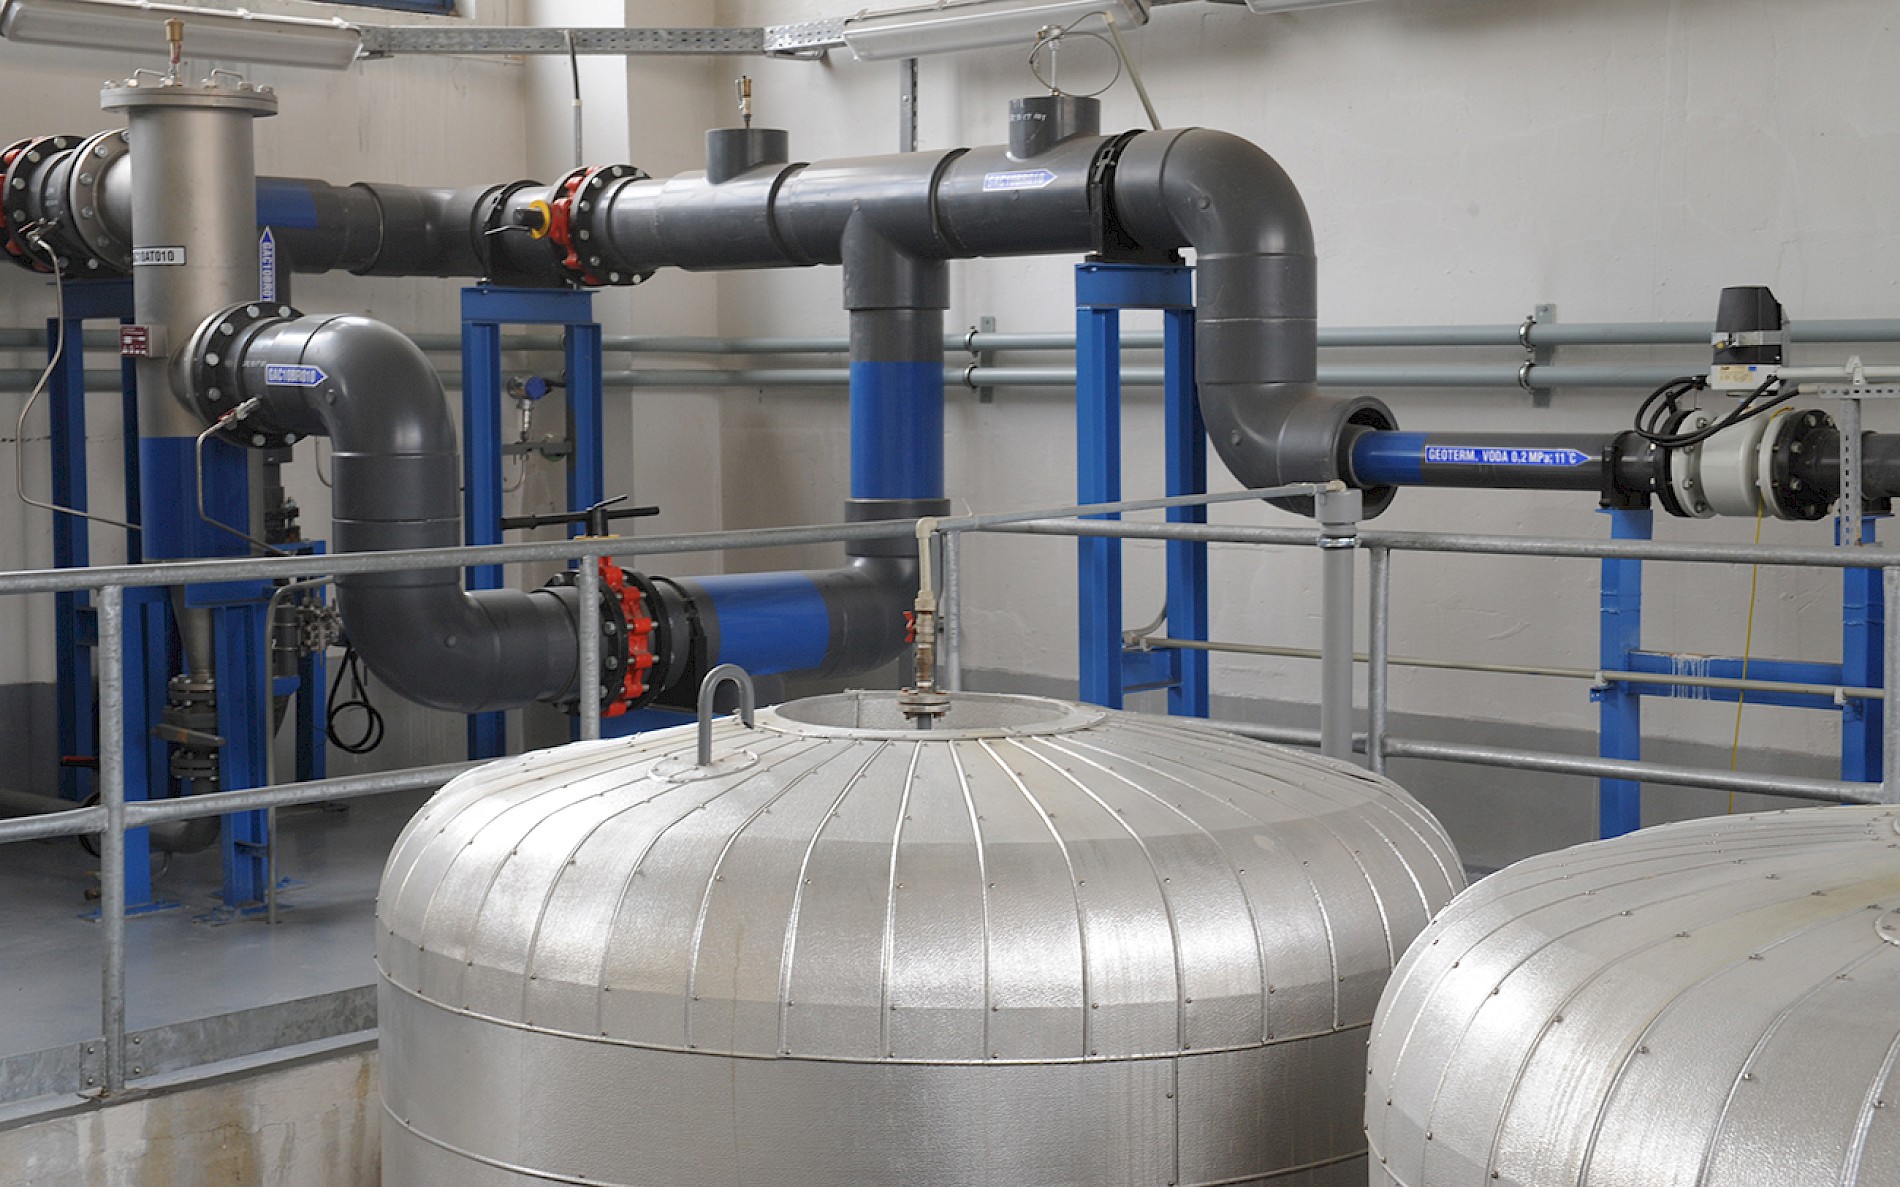 Geothermal tanks are connected to you with pipes.